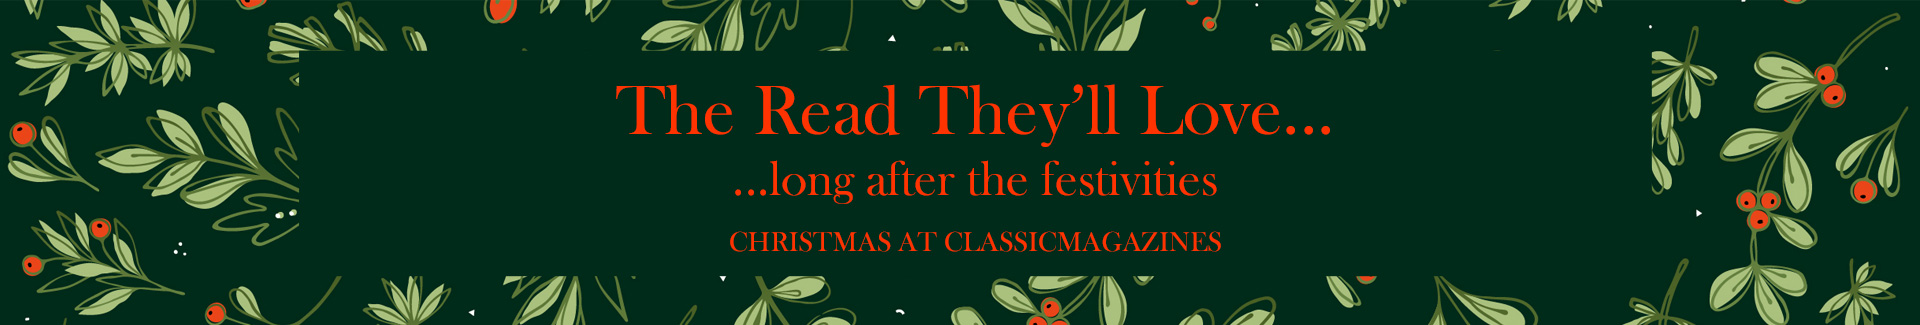 Christmas at ClassicMagazines - The Read They'll love that lasts long after the festivities